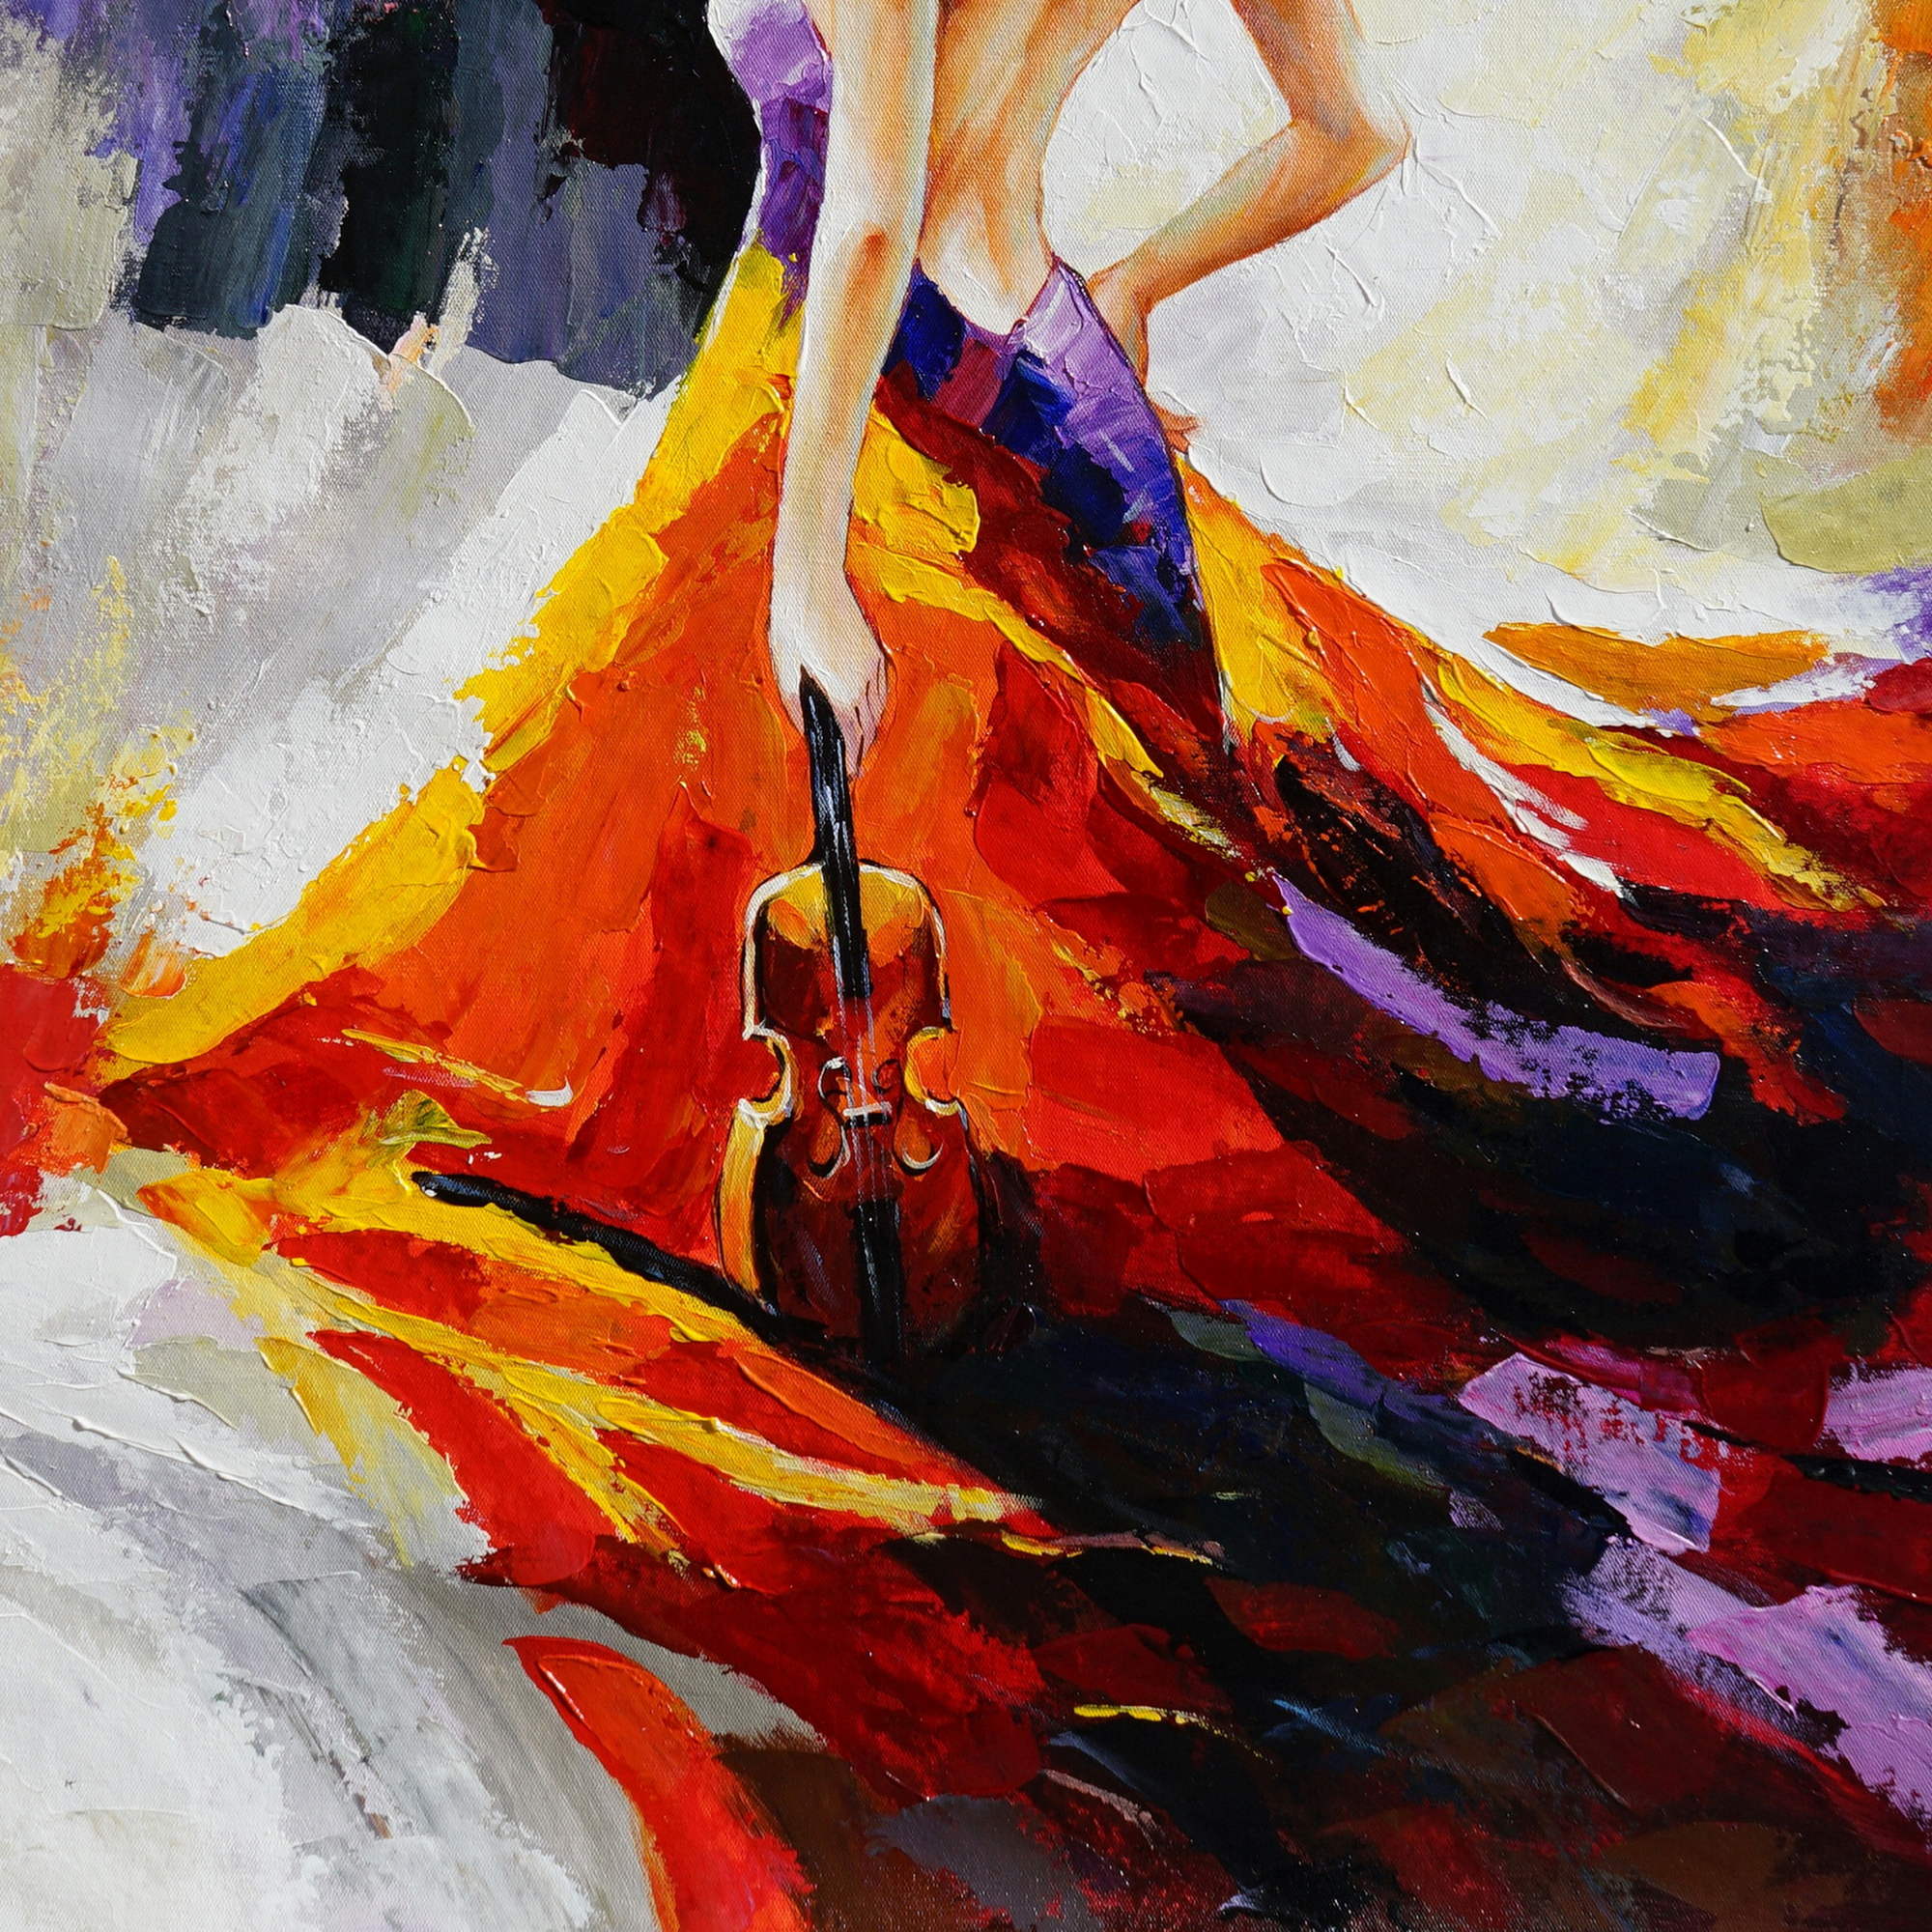 Abstract painting Violinist with brightly colored dress 75x100cm